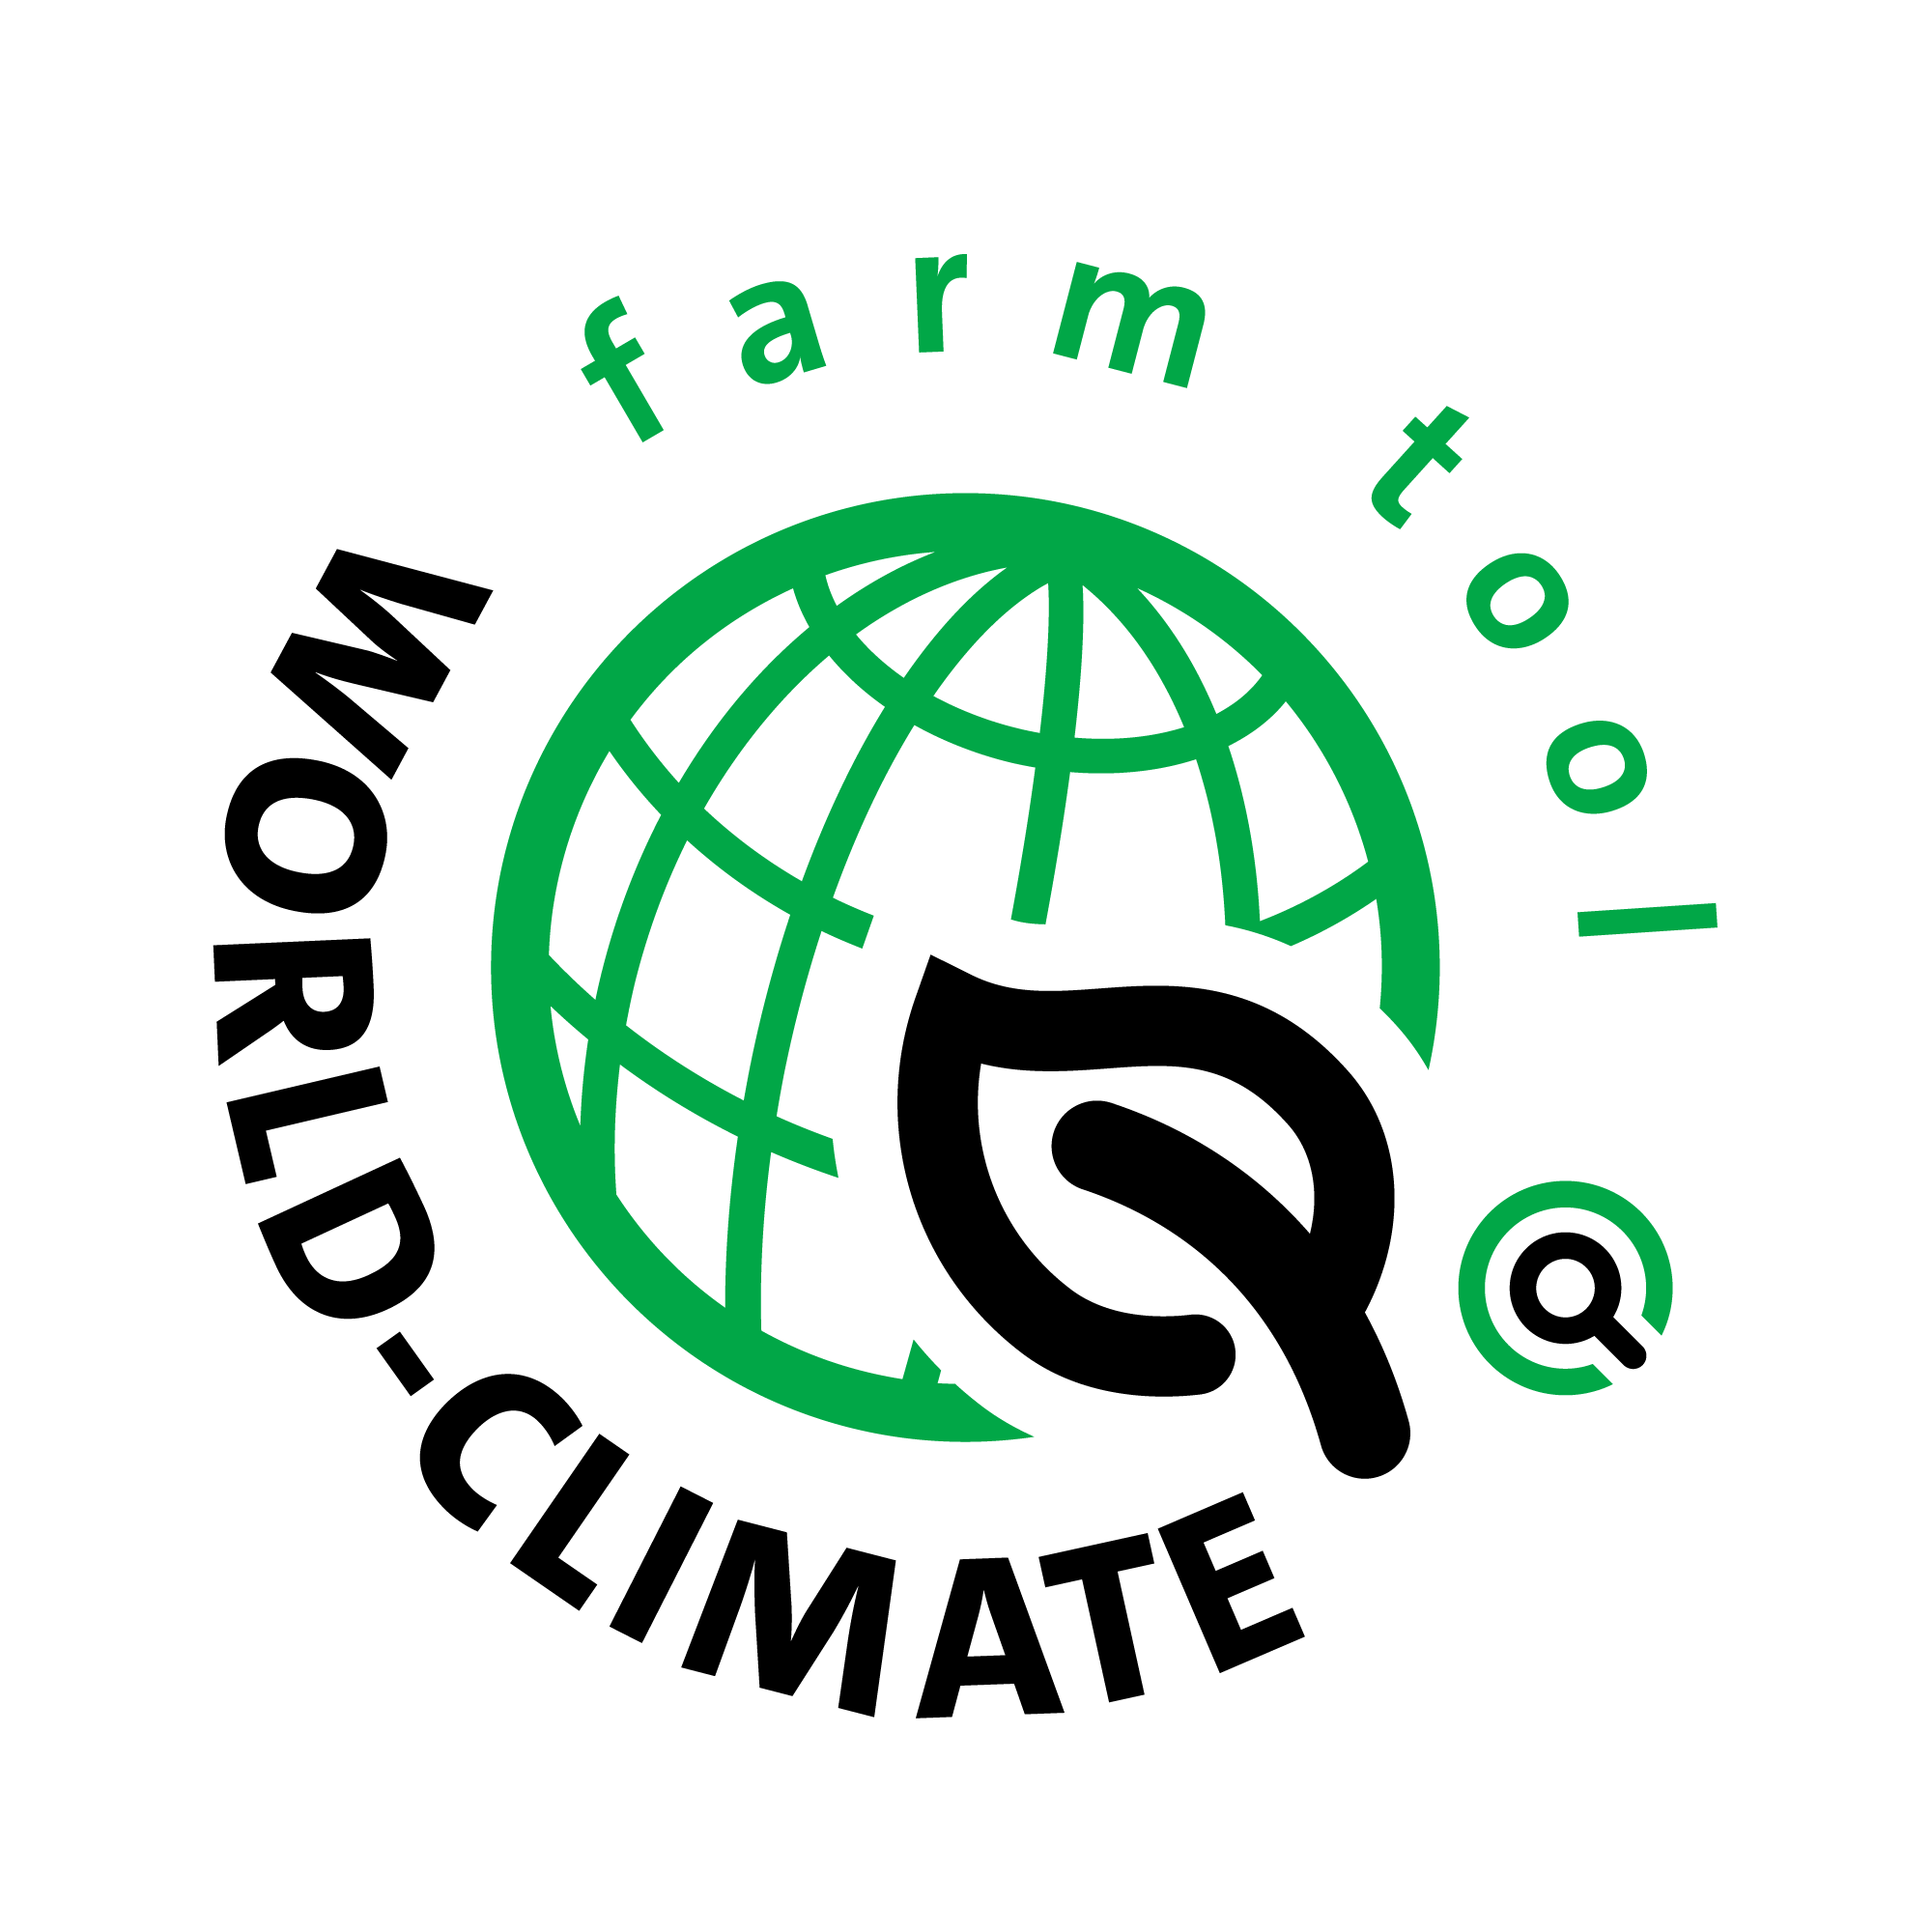 World-Climate Farm Tool – For the calculation of carbon footprints in agriculture